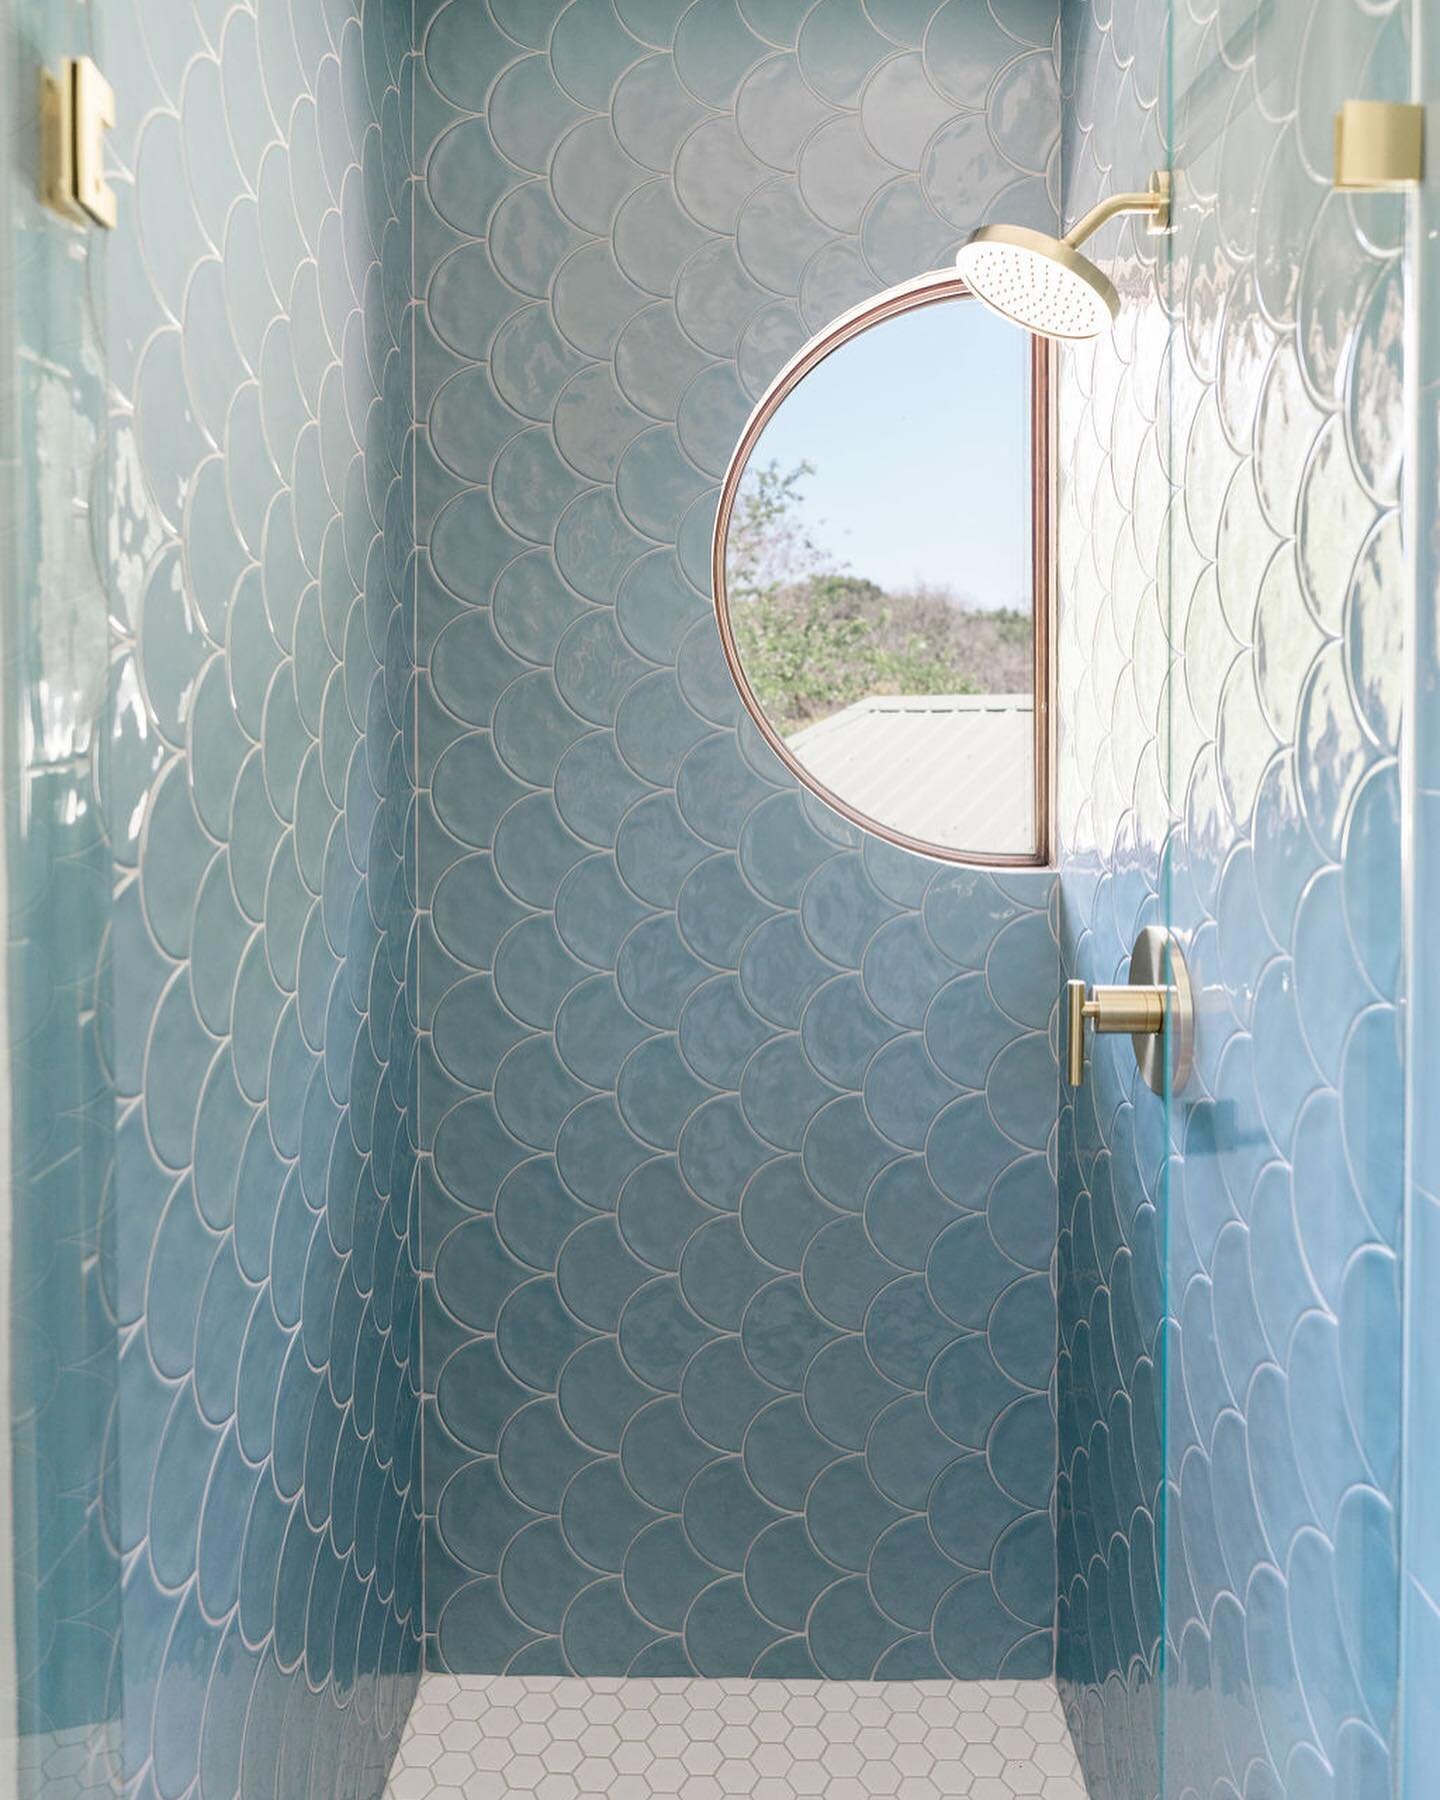 Working with this existing half circle window made for a unique opportunity in this kids bath - turning the fish scale tile to mimic the shape is such a fun detail!

Design &amp; Styling: @l.louisedesign 
Photography: @madelineharperphoto 

#kidsbath